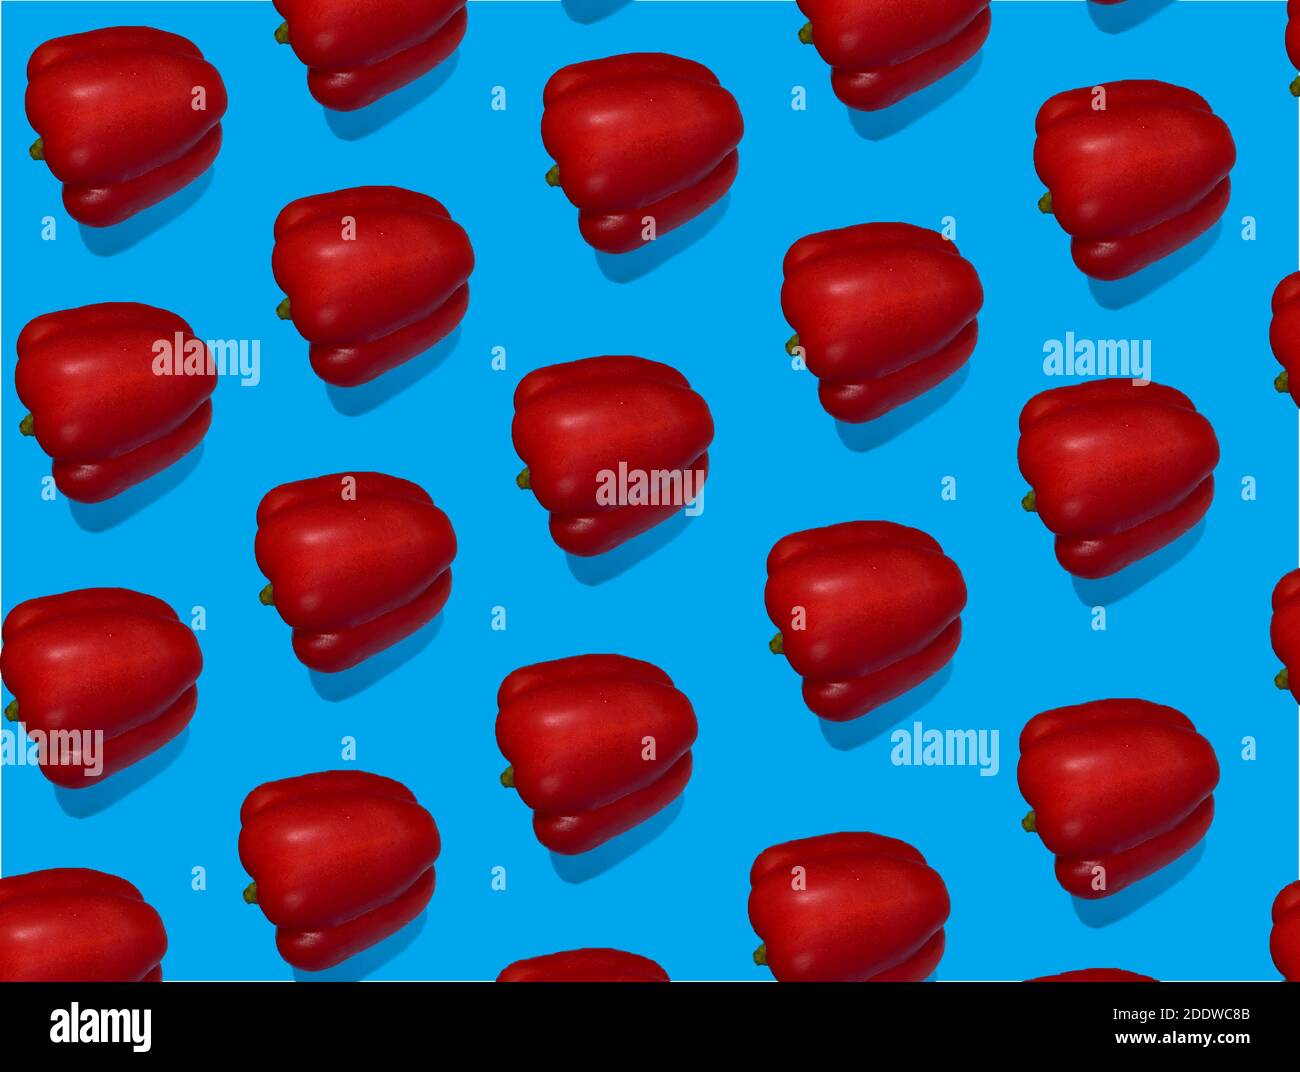 Set of red bell peppers on a blue background. Pattern from red peppers, healthy food concept. Stock Photo